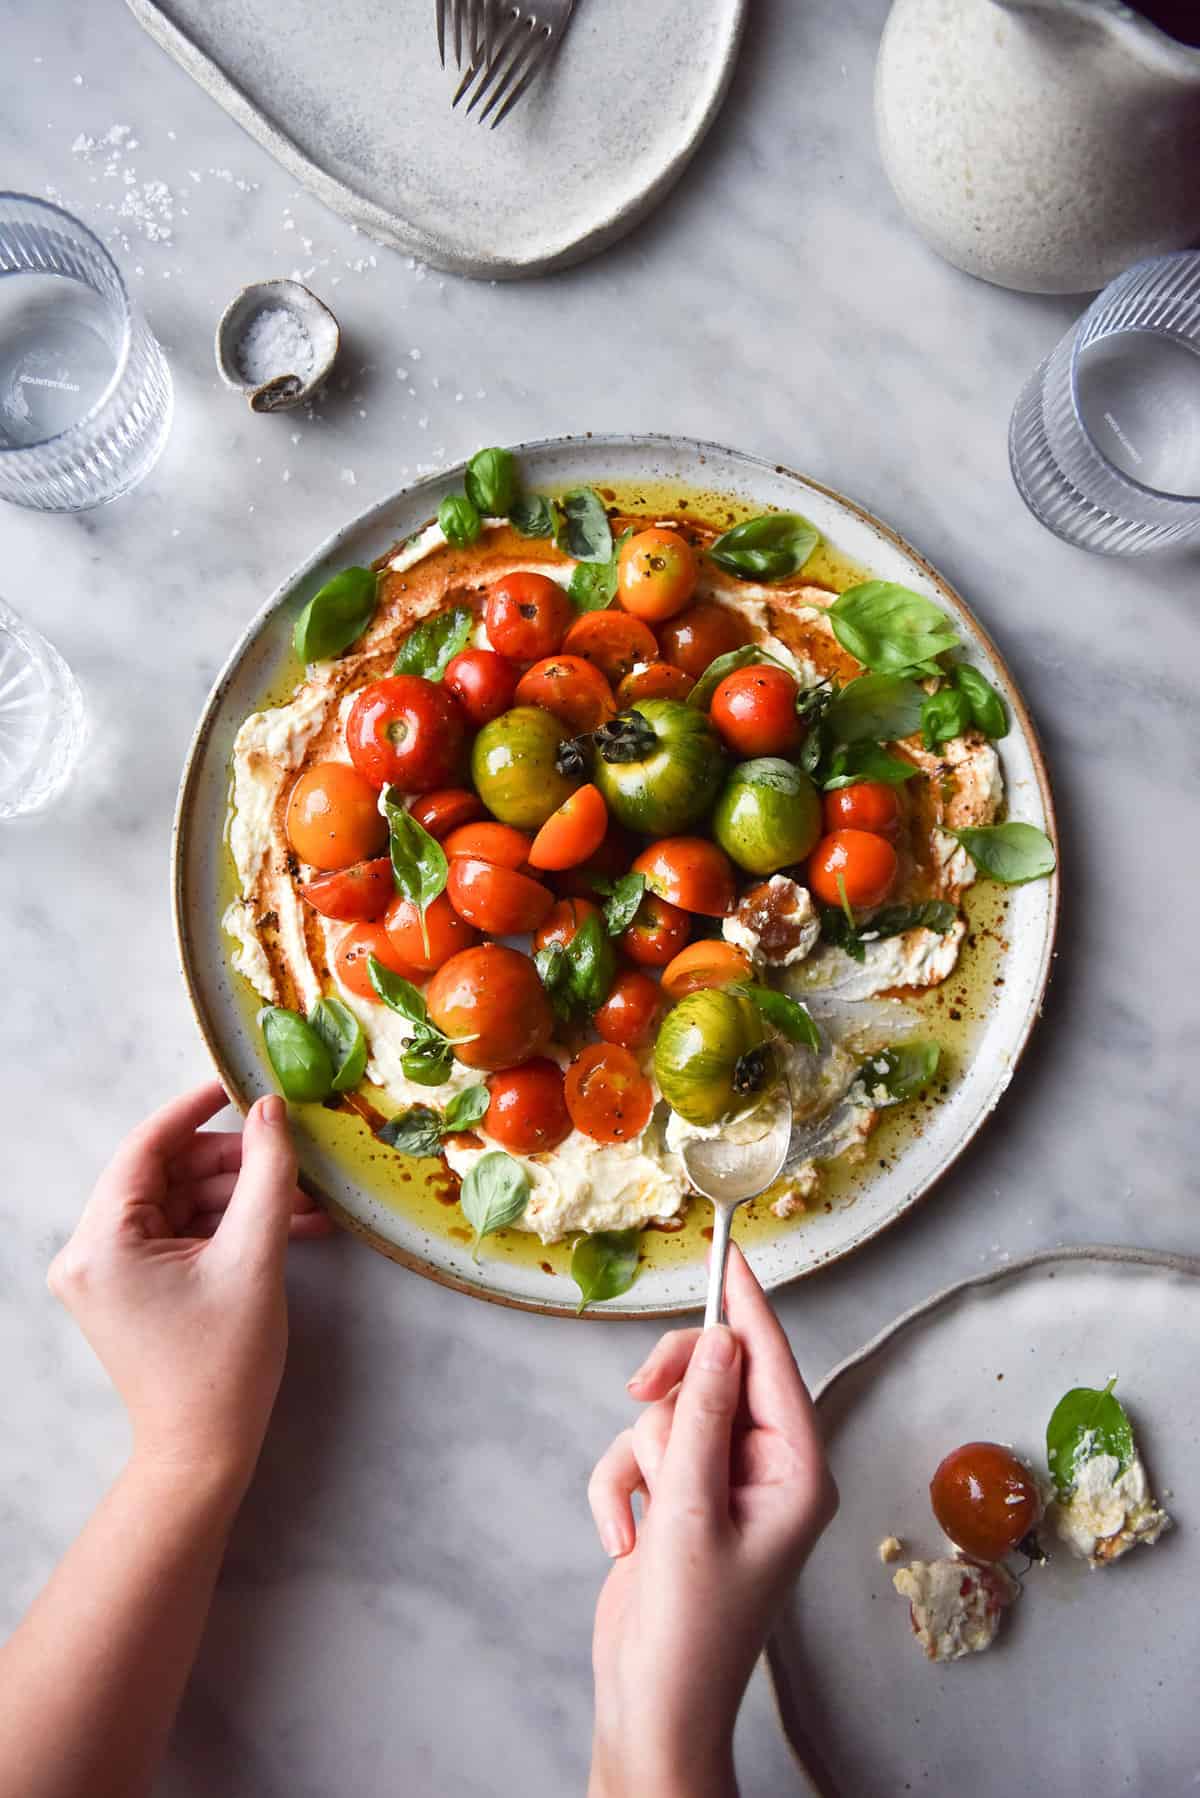 Lactose-free lemon ricotta with summer tomatoes, balsamic and basil on a white ceramic plate atop a white marble table. The salad is surrounded by water glasses, pinch bowls and extra white ceramics